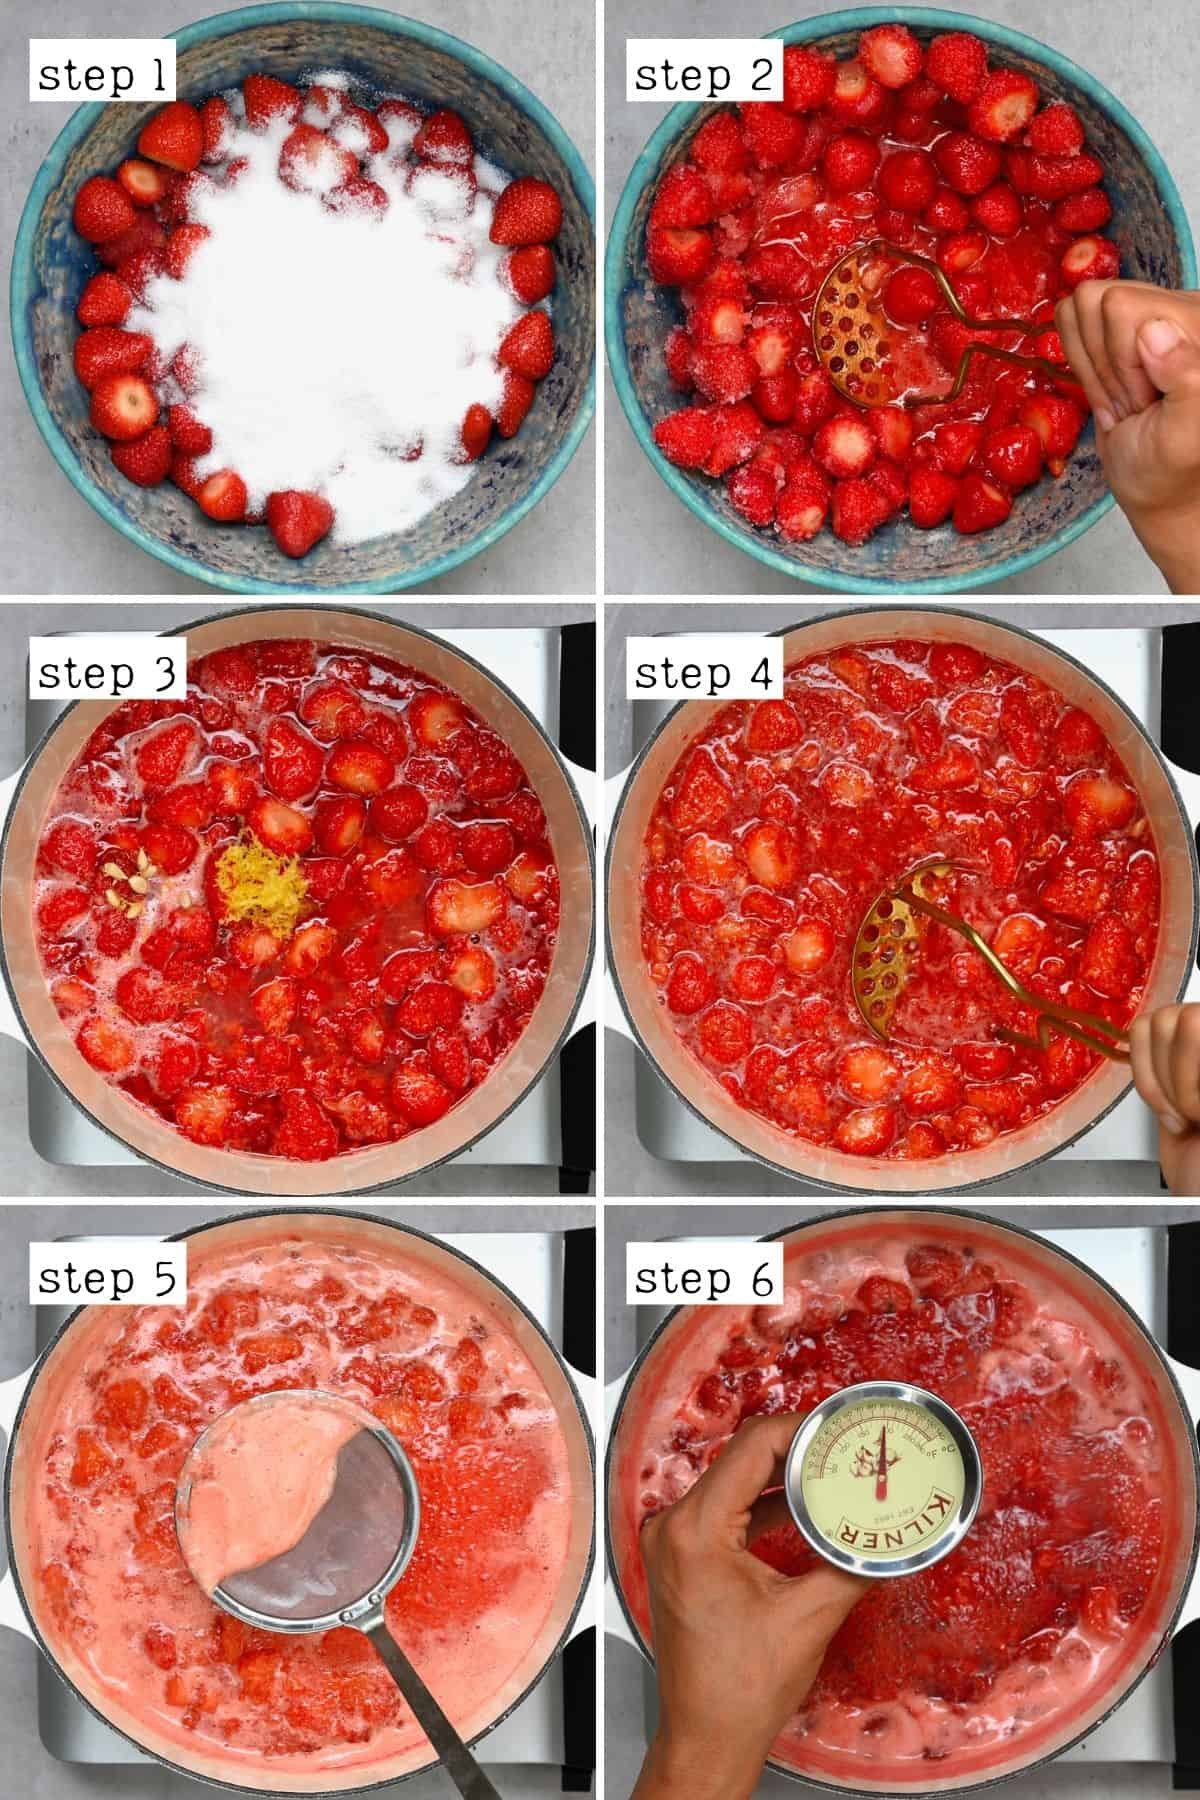 Steps for cooking strawberry jam